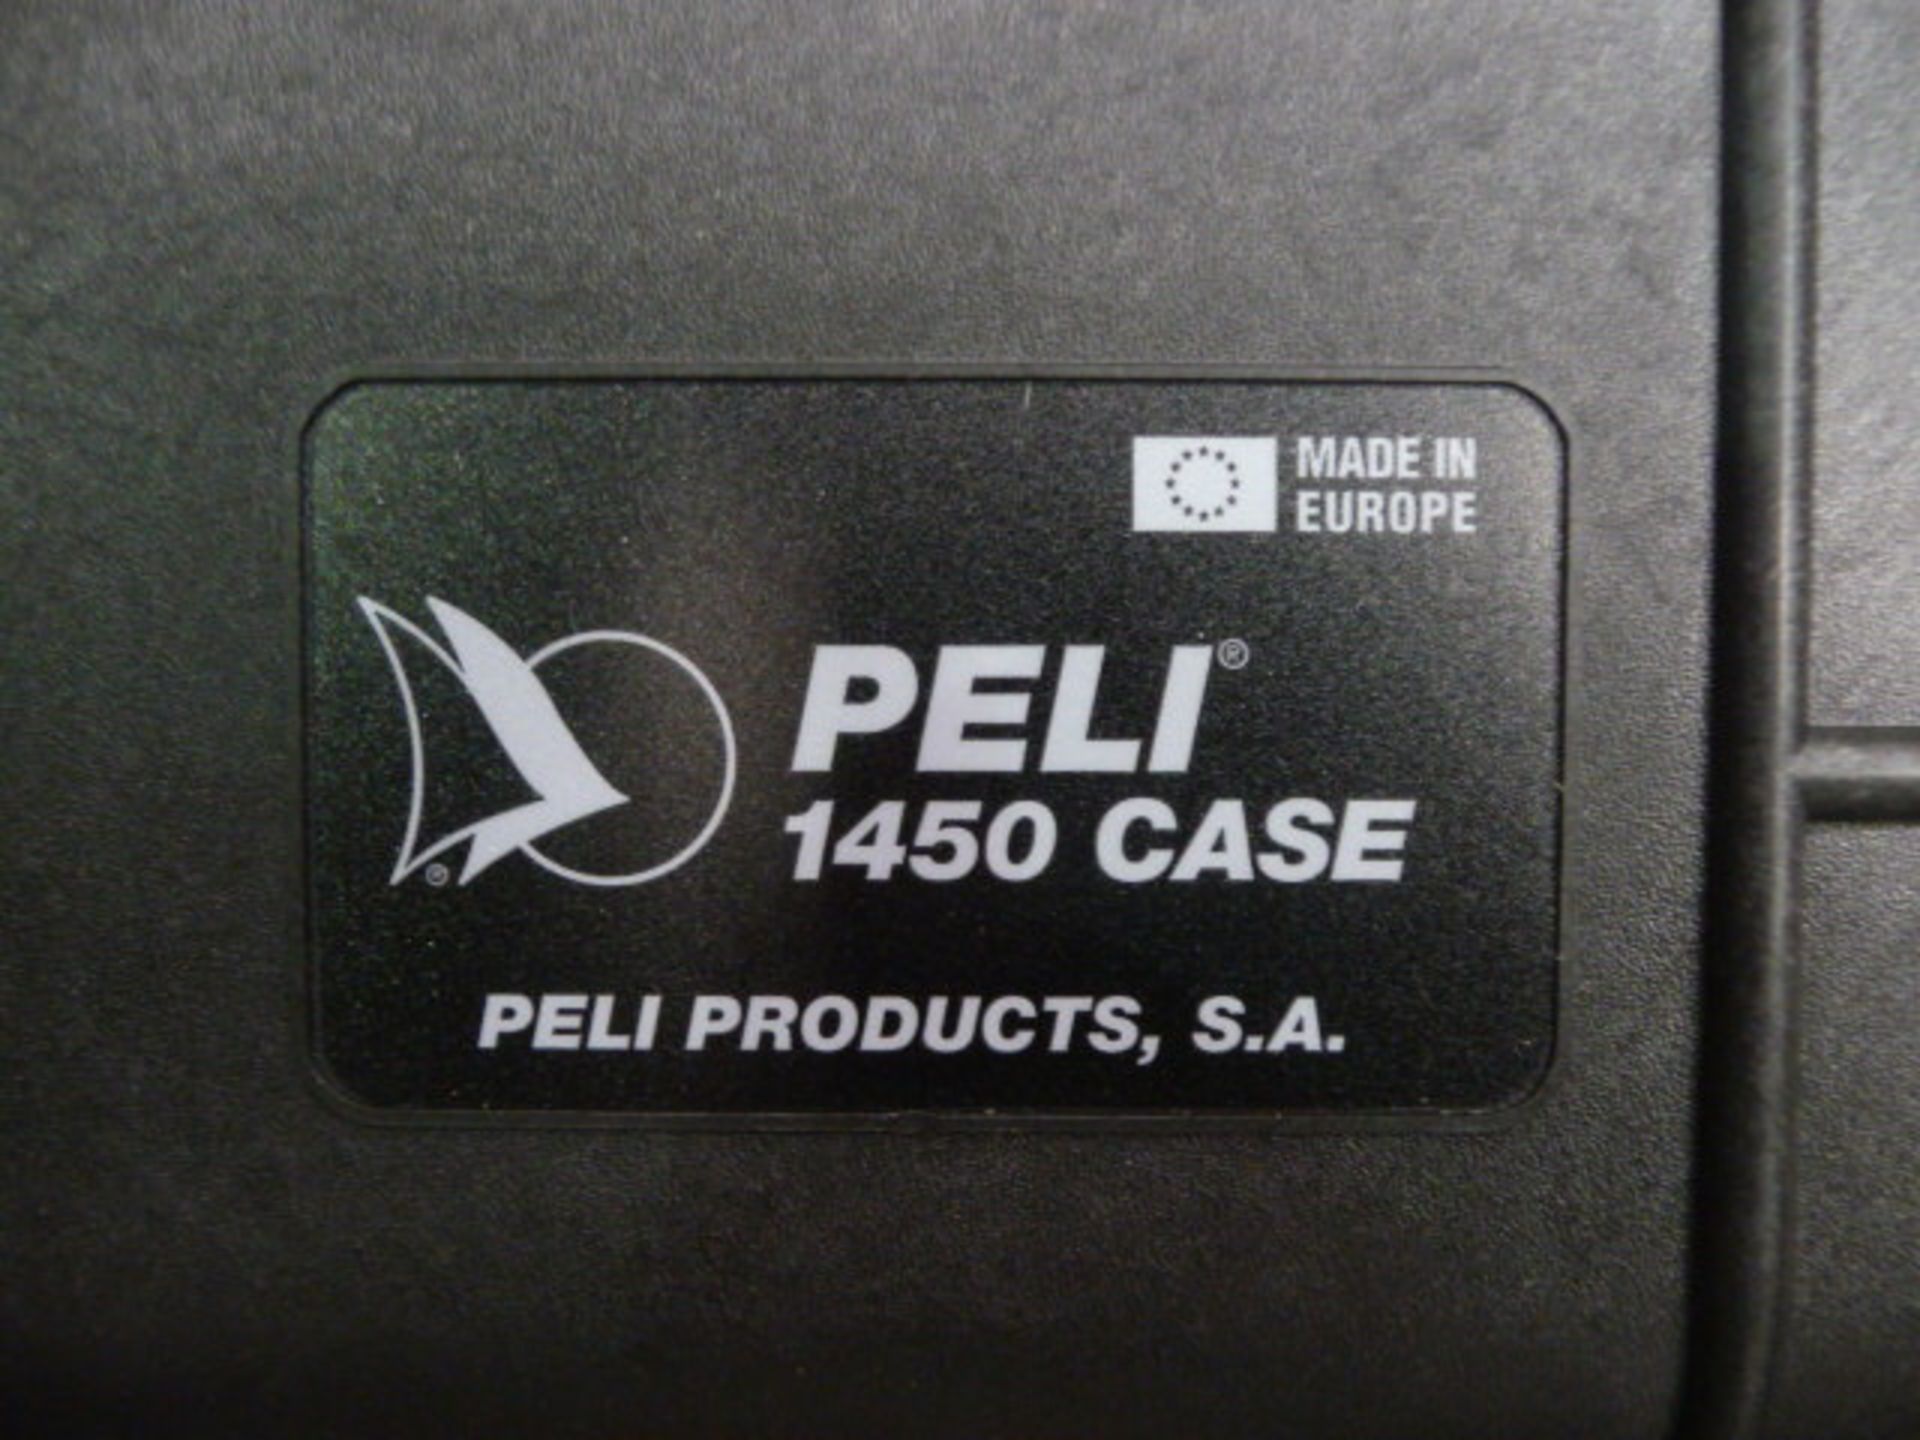 Heavy Duty Peli Case 1450 containing a Spider Wear Check Kit - Image 4 of 7